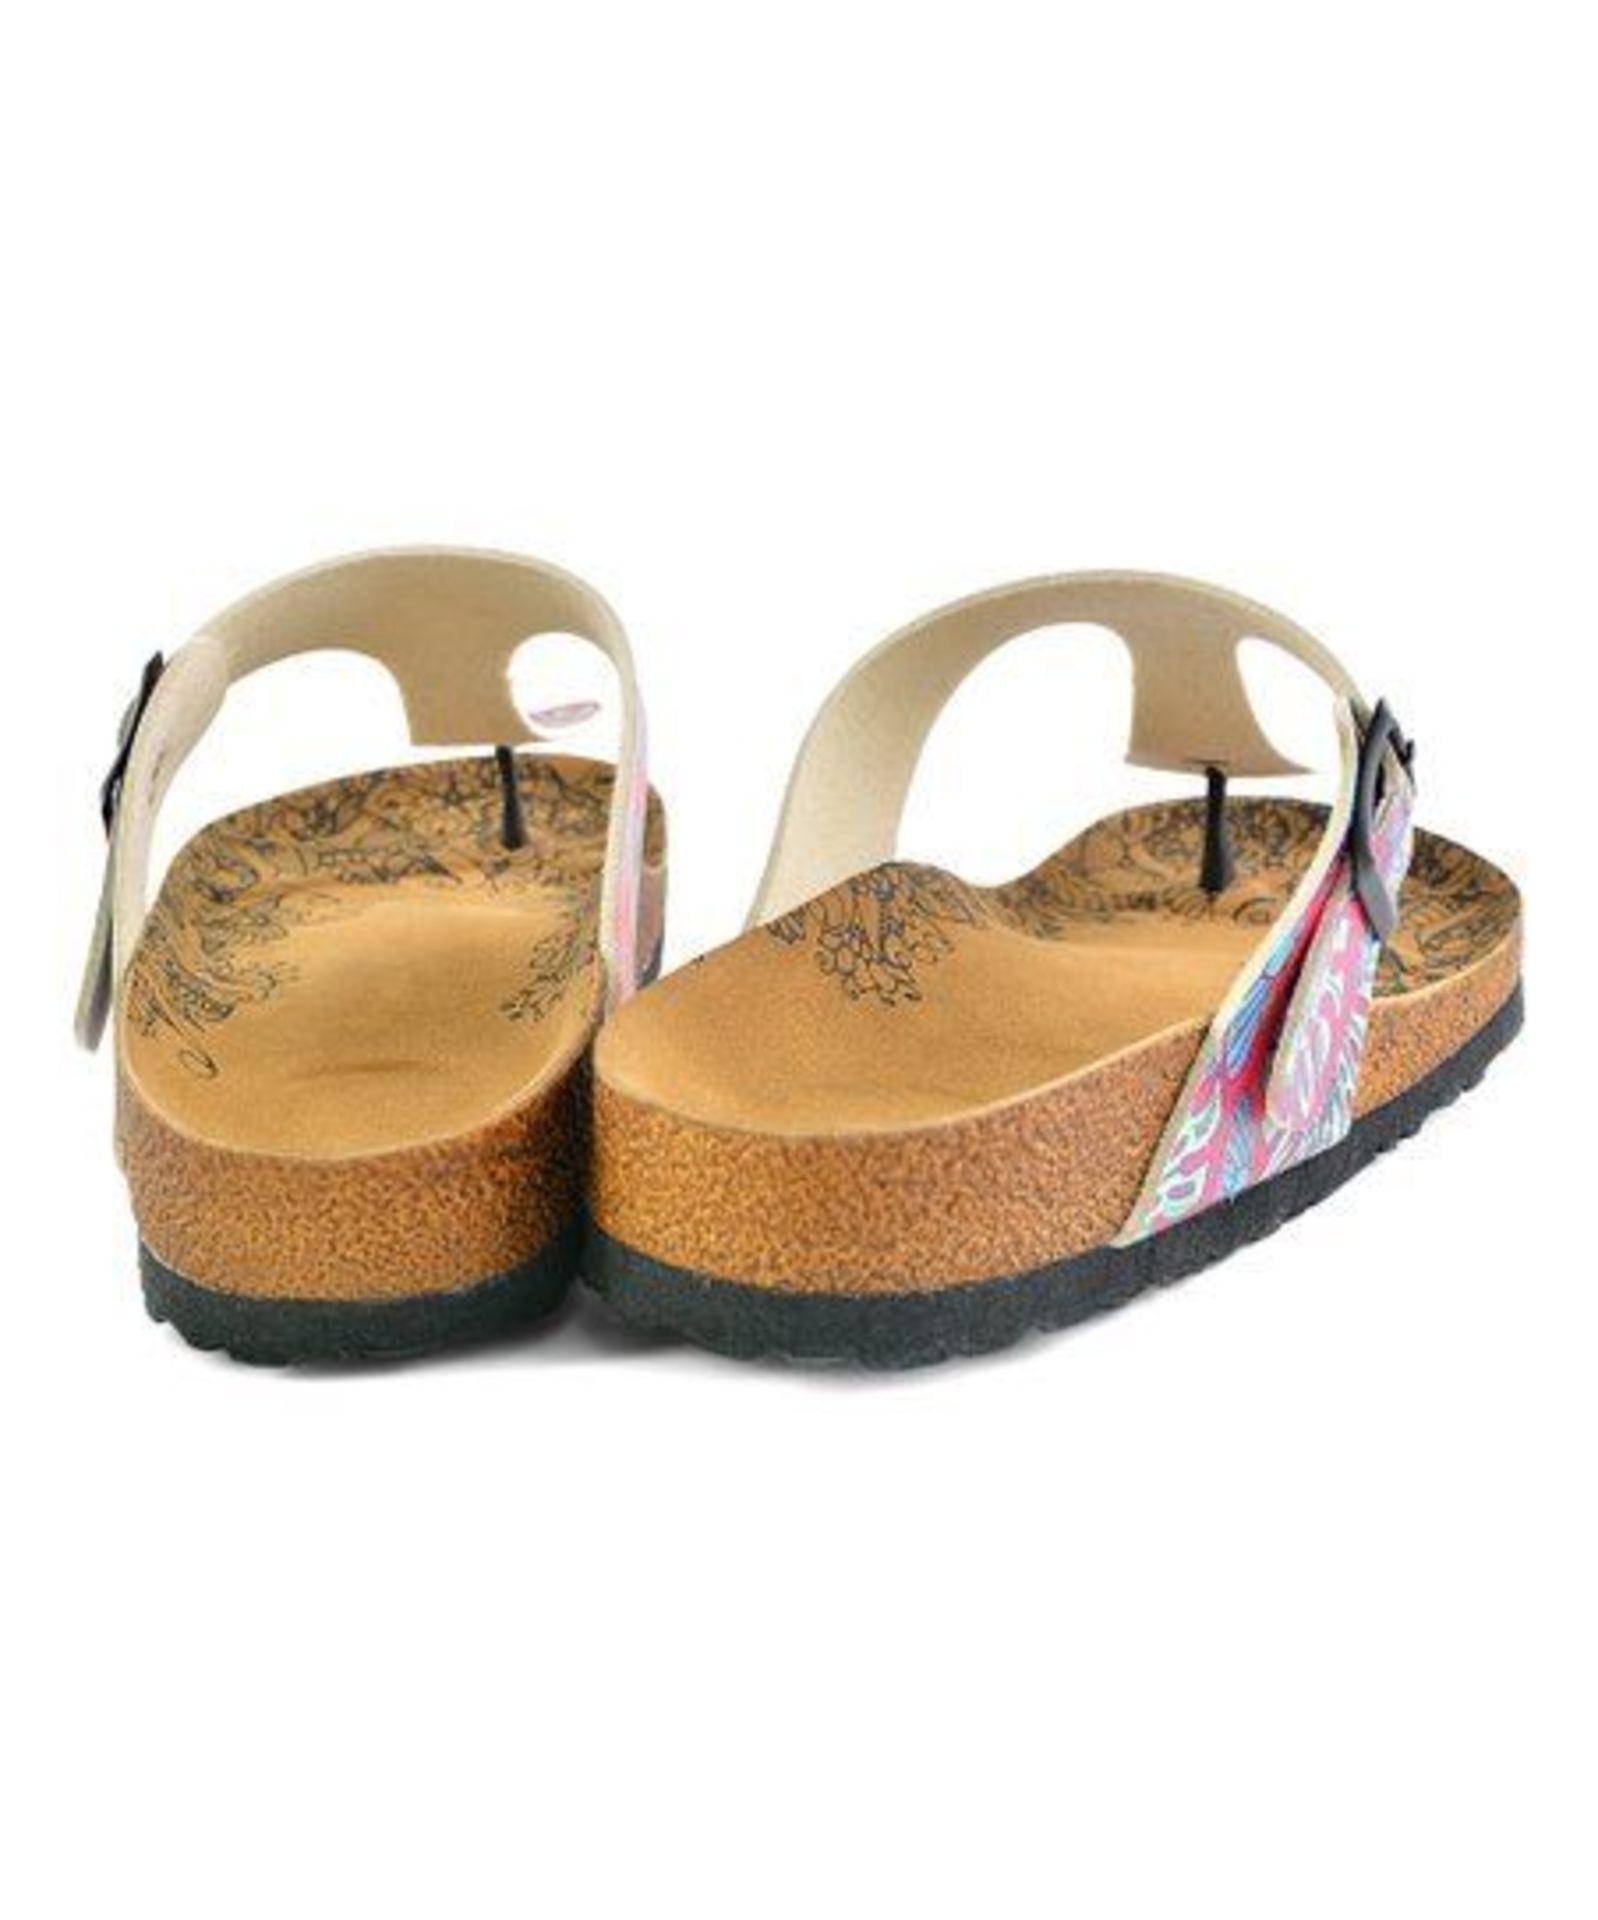 Calceo, Pink & Turquoise T-Strap Sandal - Women, Size Uk 2.5 Eur 35 (New With Box) [Ref: 47526520A/ - Image 4 of 4